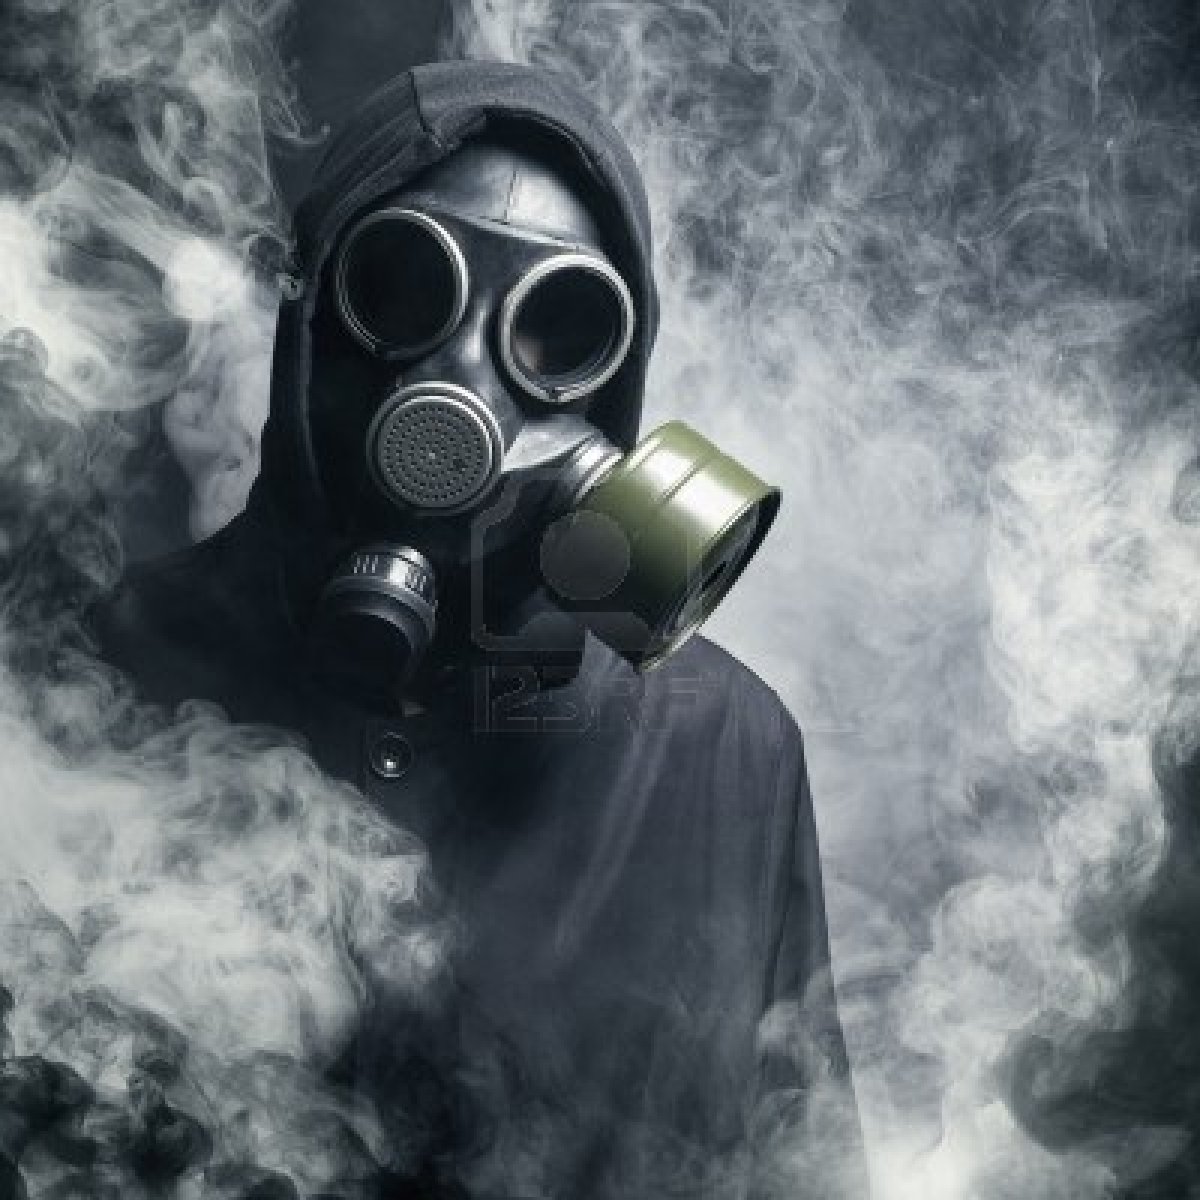 http://kirbymuseum.org/blogs/dynamics/wp-content/uploads/sites/10/2013/07/15912466-a-man-in-a-gas-mask-in-the-smoke-black-background.jpg